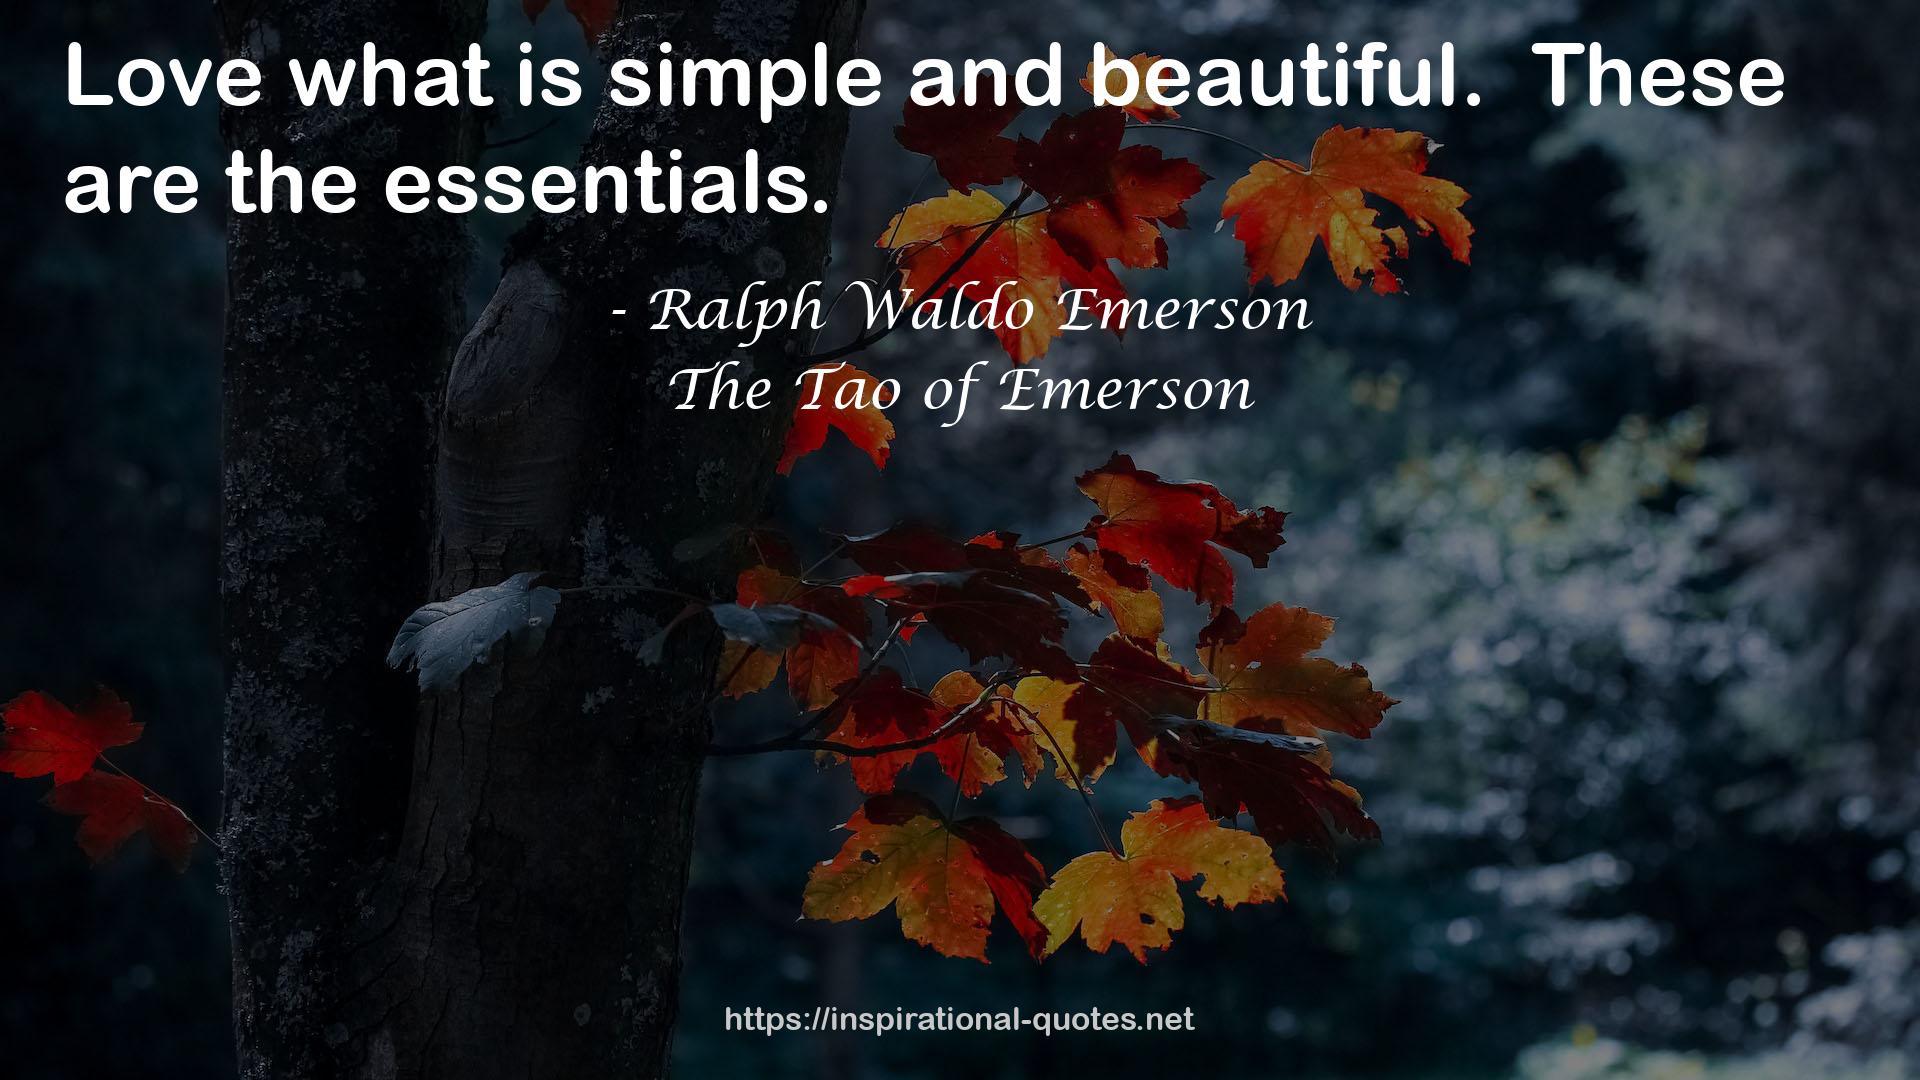 The Tao of Emerson QUOTES